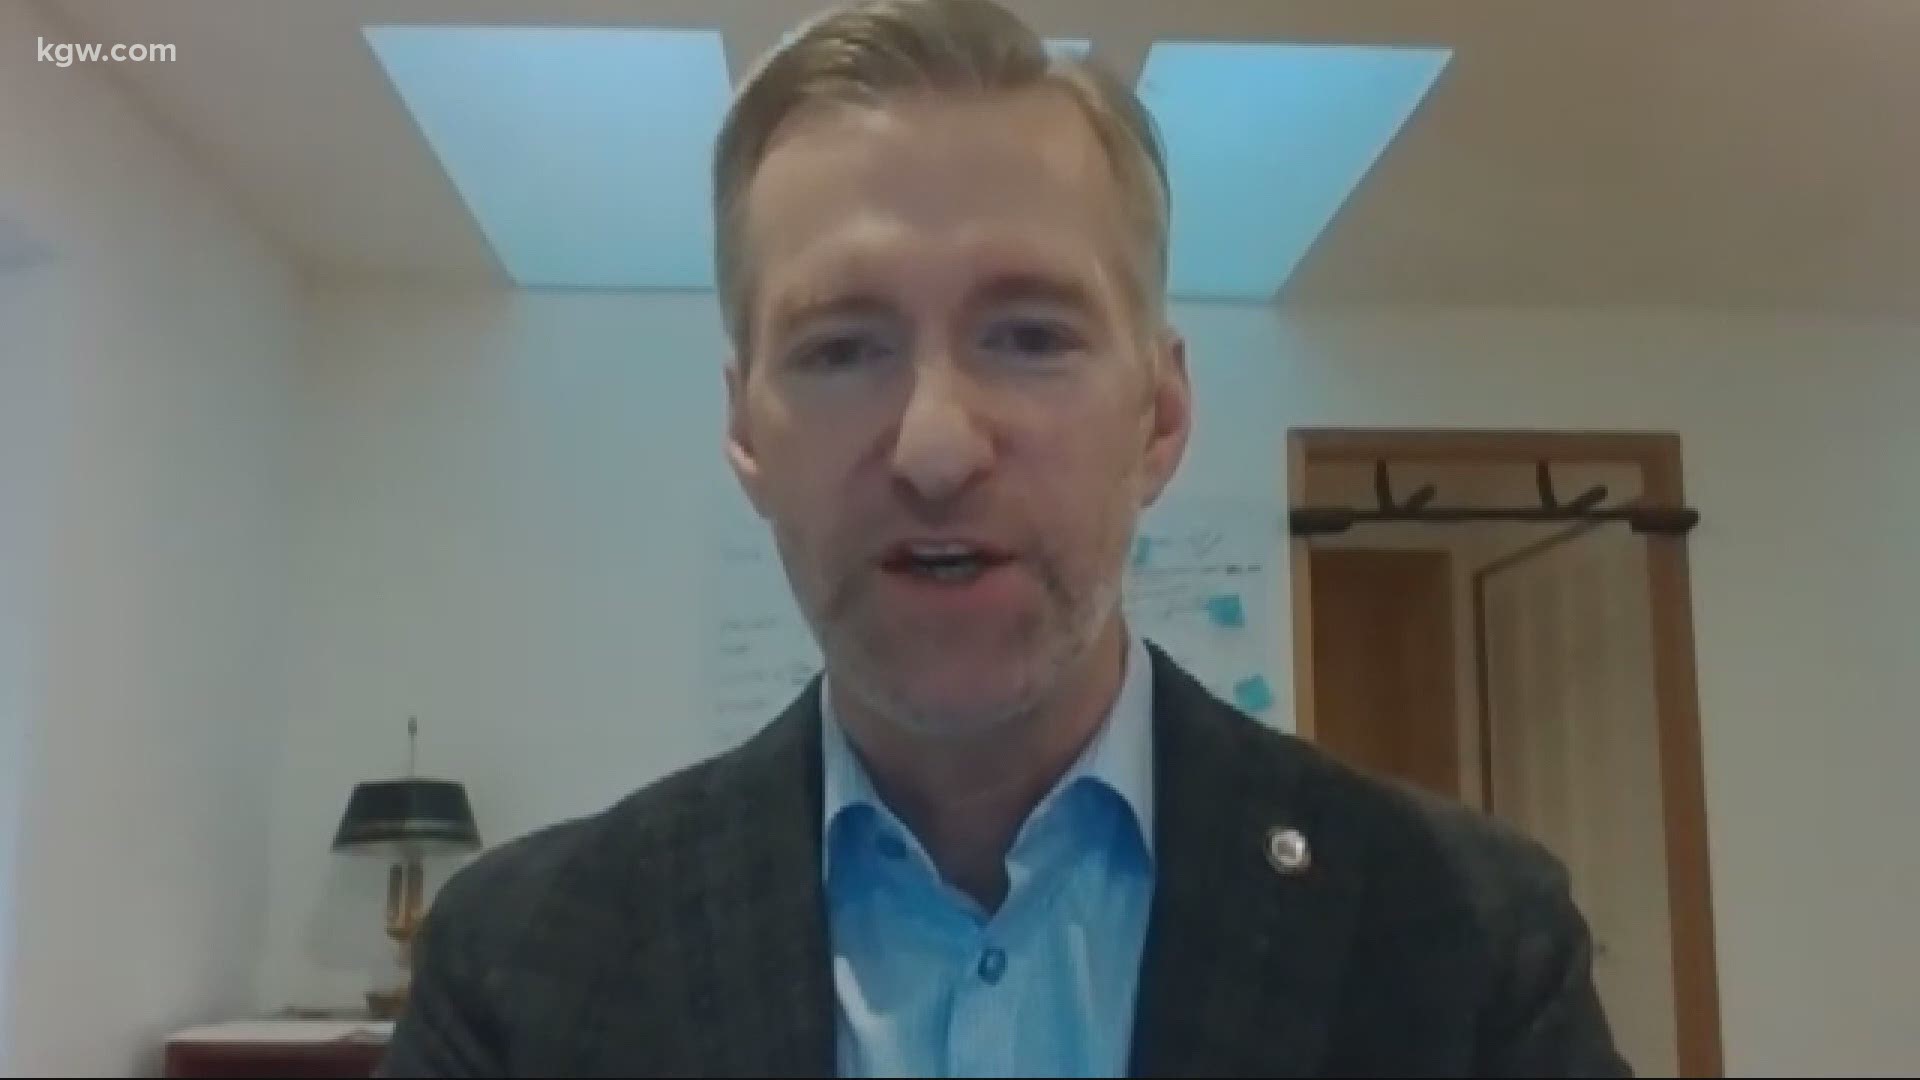 Mayor Ted Wheeler started 2021 by promising to crack down and change how Portland polices protests that turn violent.